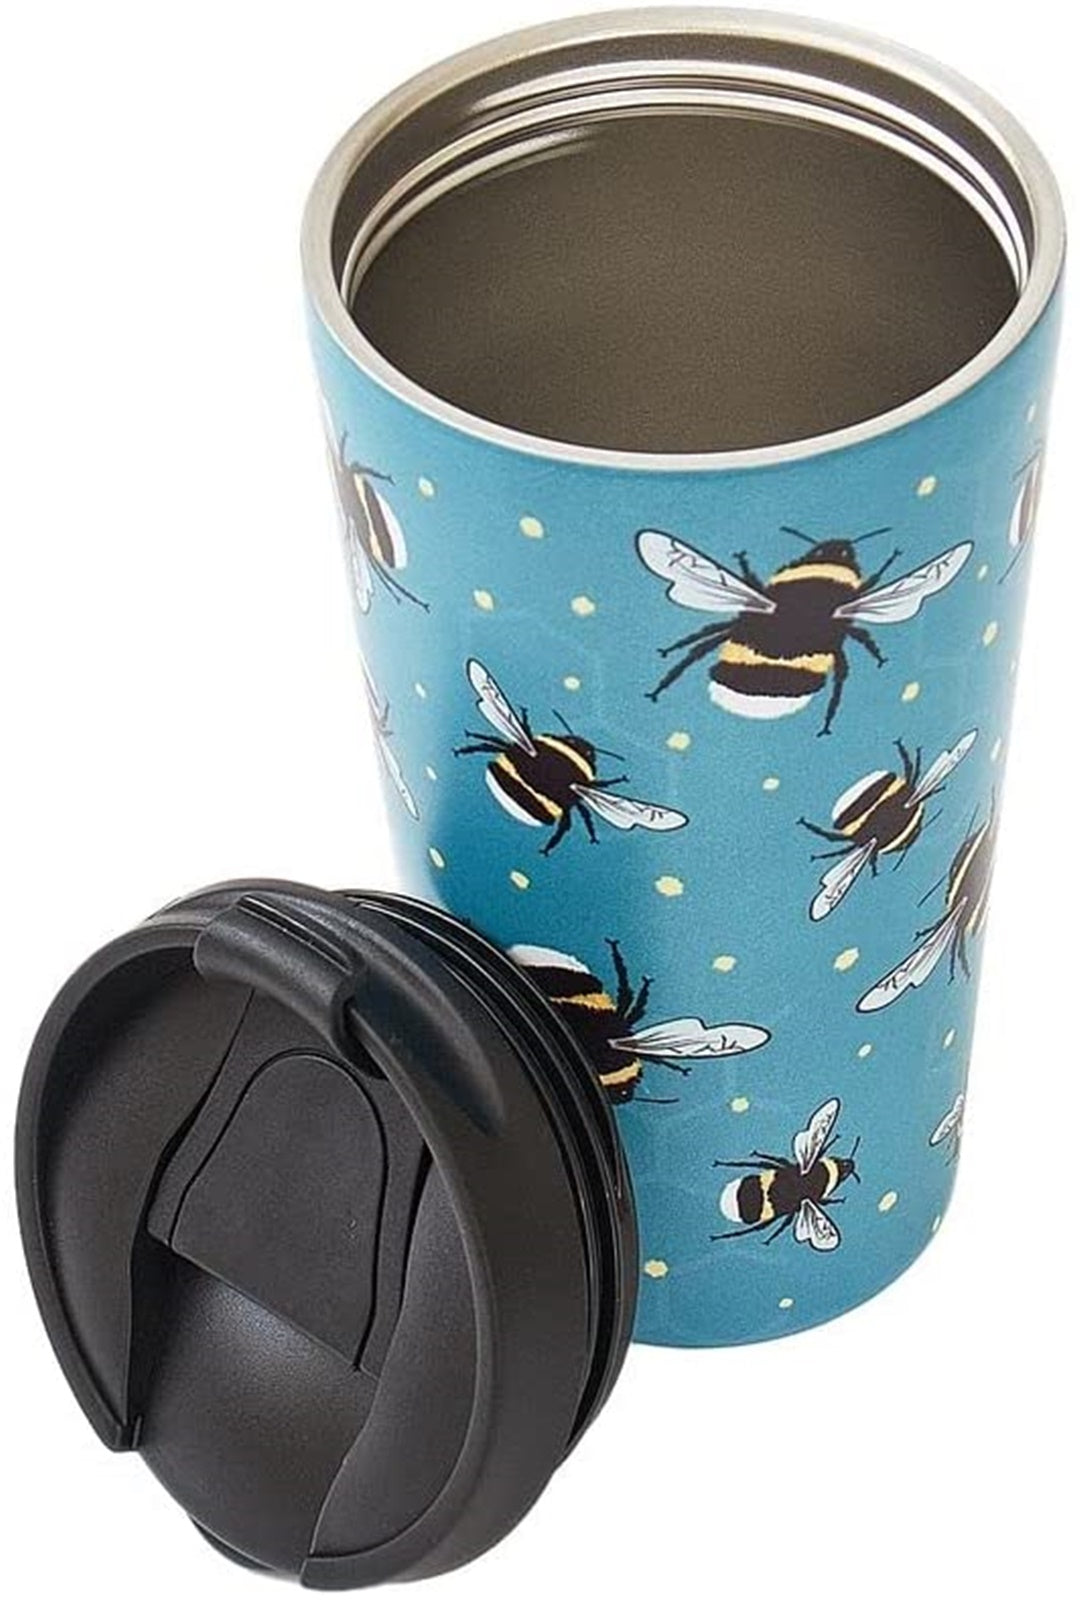 Eco Chic Reusable Thermal Coffee Cup | Stainless Steel Insulated Travel Mug with Leakproof Lid | Eco-Friendly and Reusable for Hot & Cold Drinks (Blue Bee, 380ml/13oz)